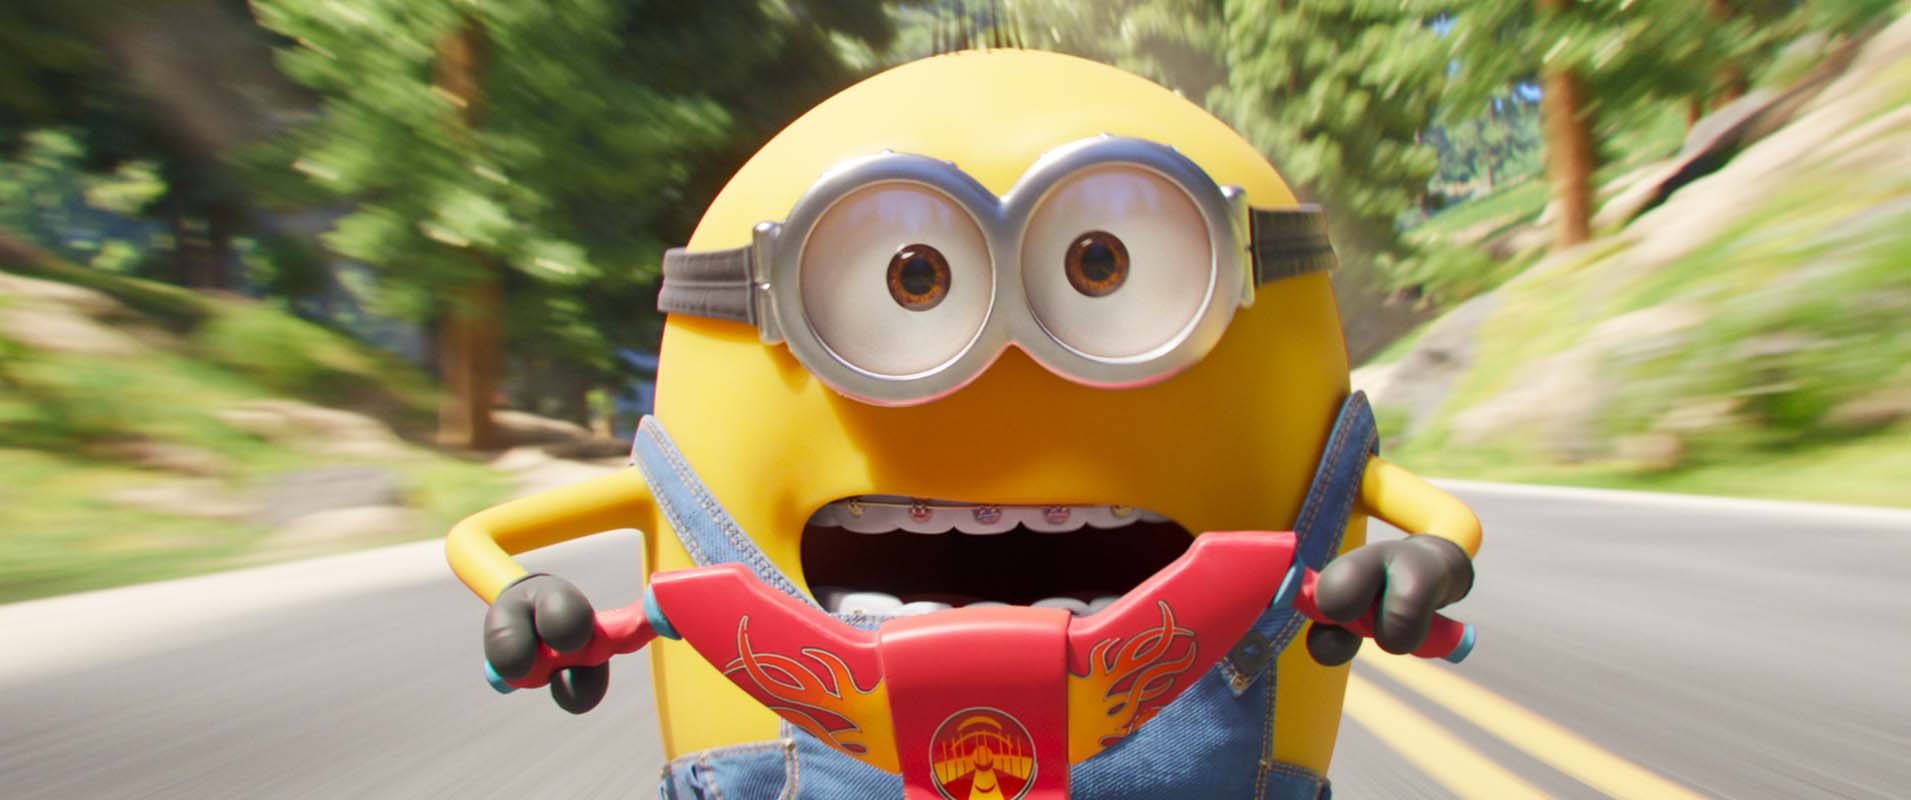 Minions The Rise Of Gru Riding Background